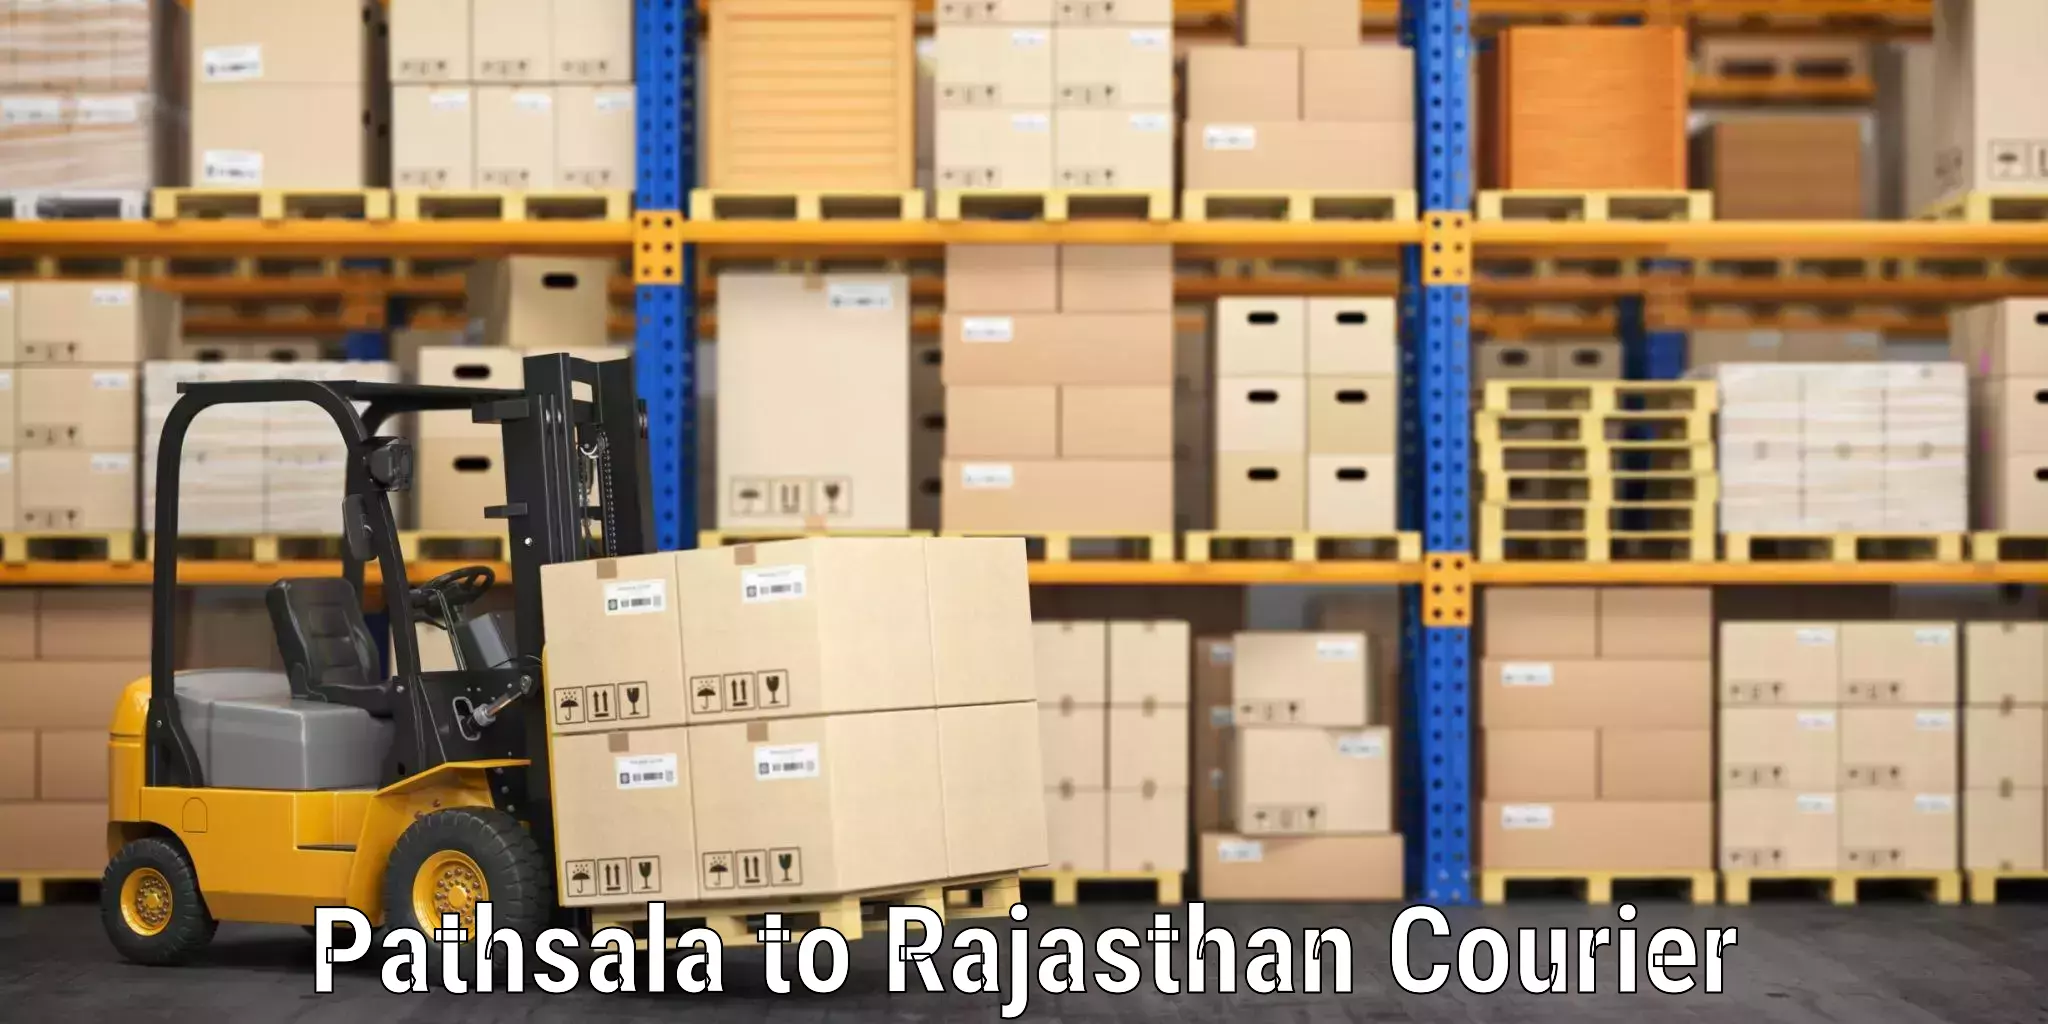 Luggage transport consultancy Pathsala to Rajasthan